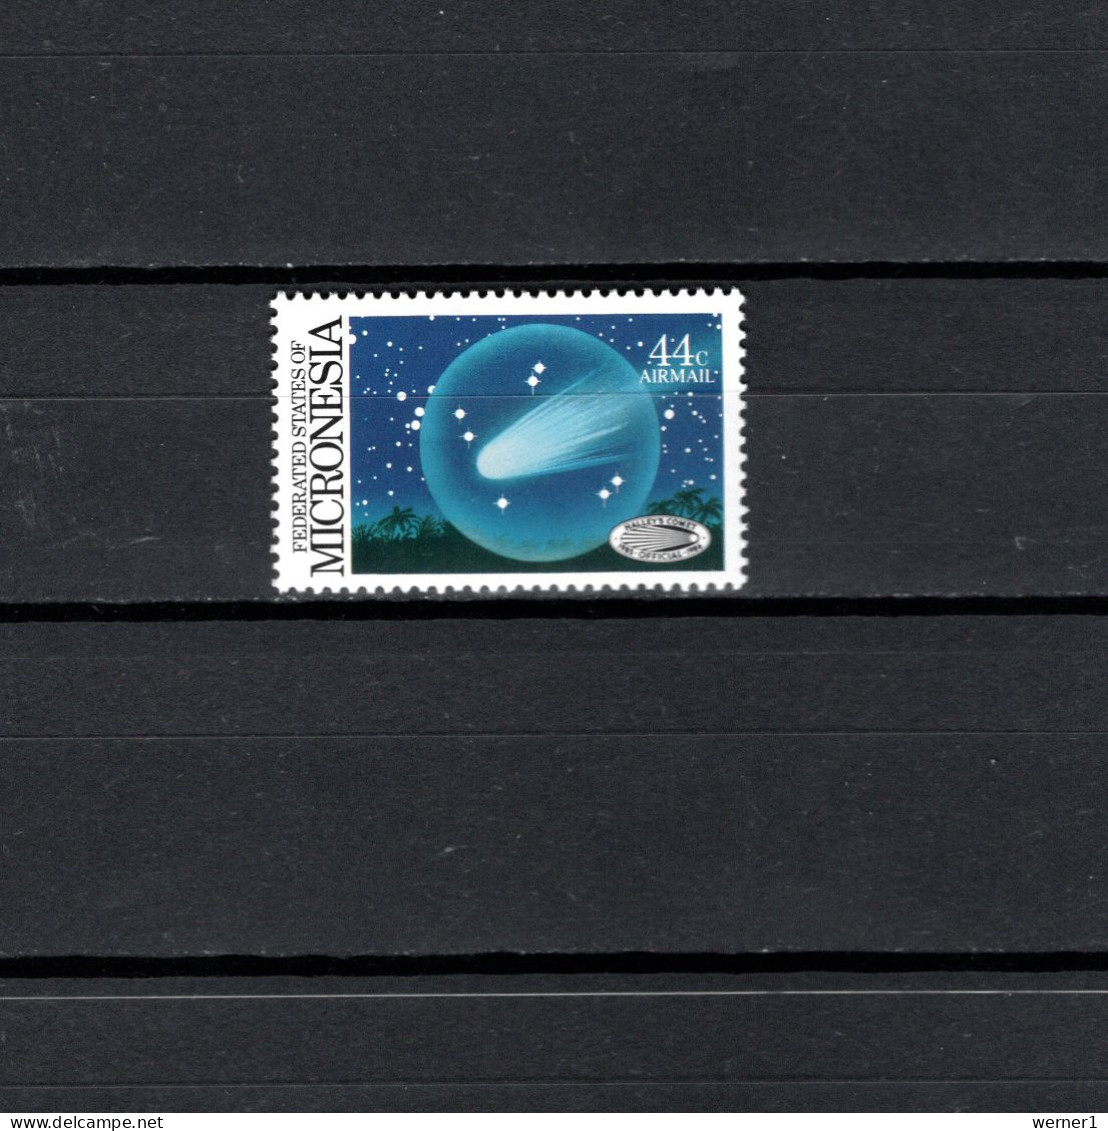 Micronesia 1986 Space, Halley's Comet Stamp MNH - Oceania